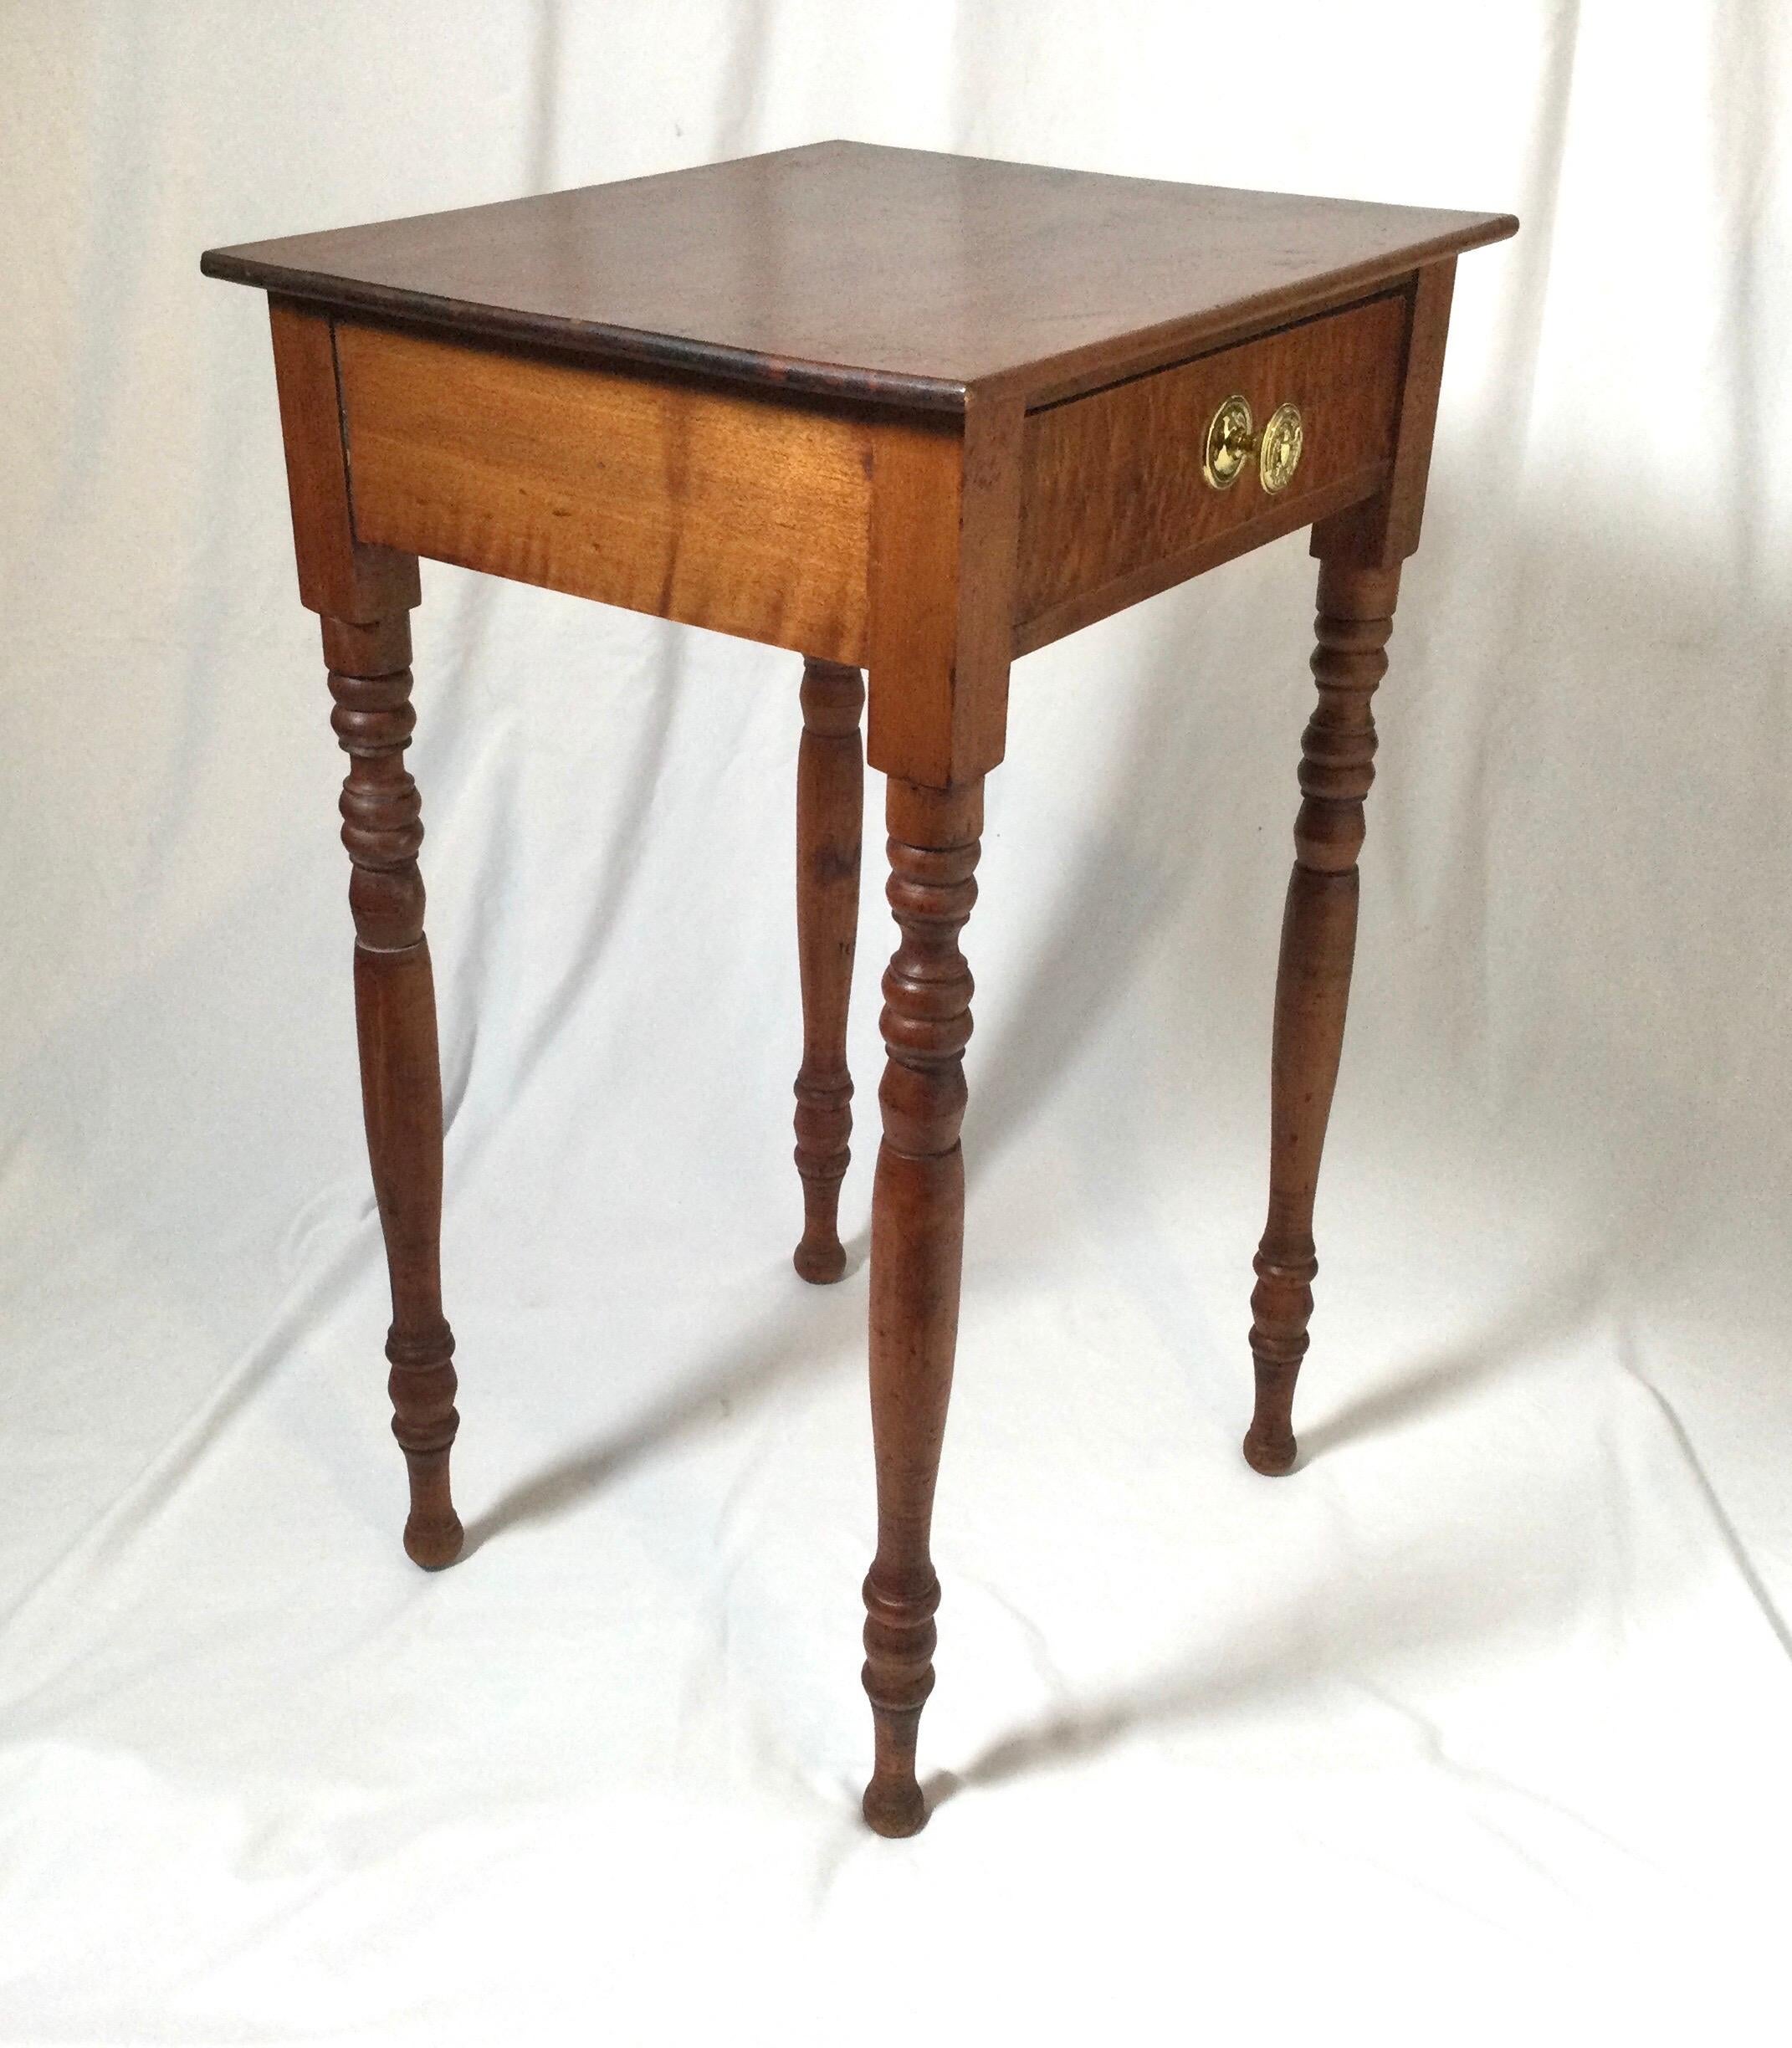 Mid-19th Century Maple One-Drawer Stand with Bird's-Eye Maple Drawer Front